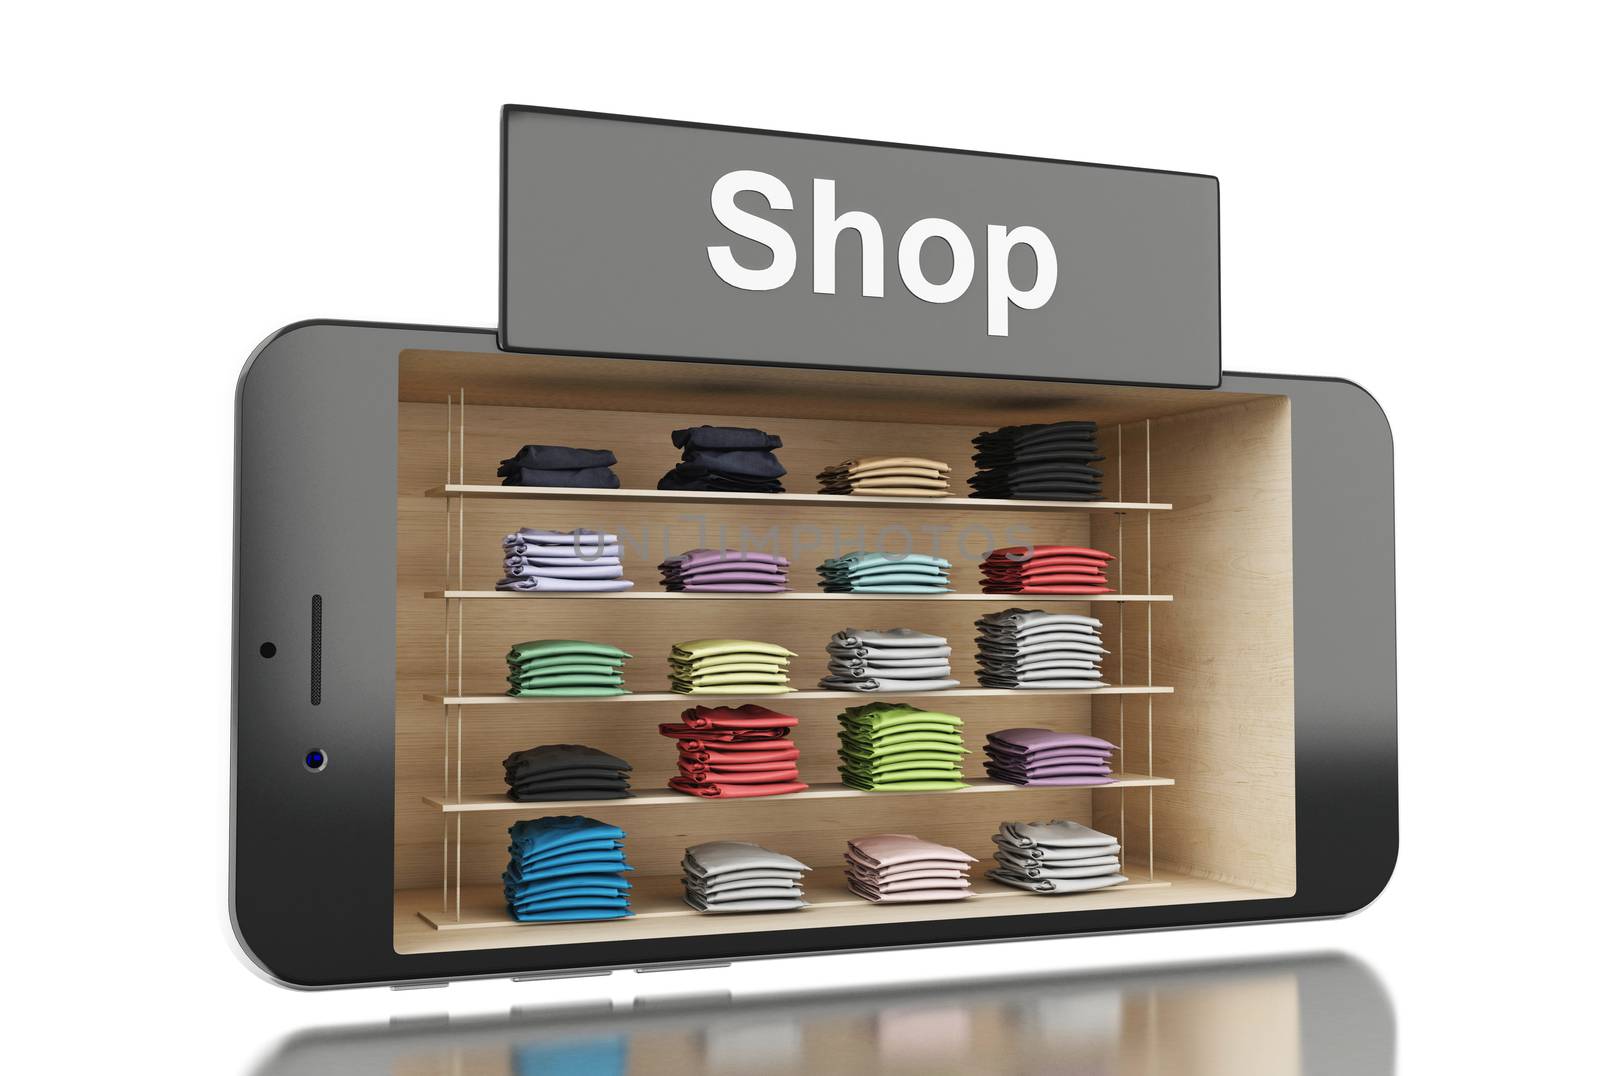 3d illustration. Smartphone with Clothing store. E-commerce, online shopping concept.